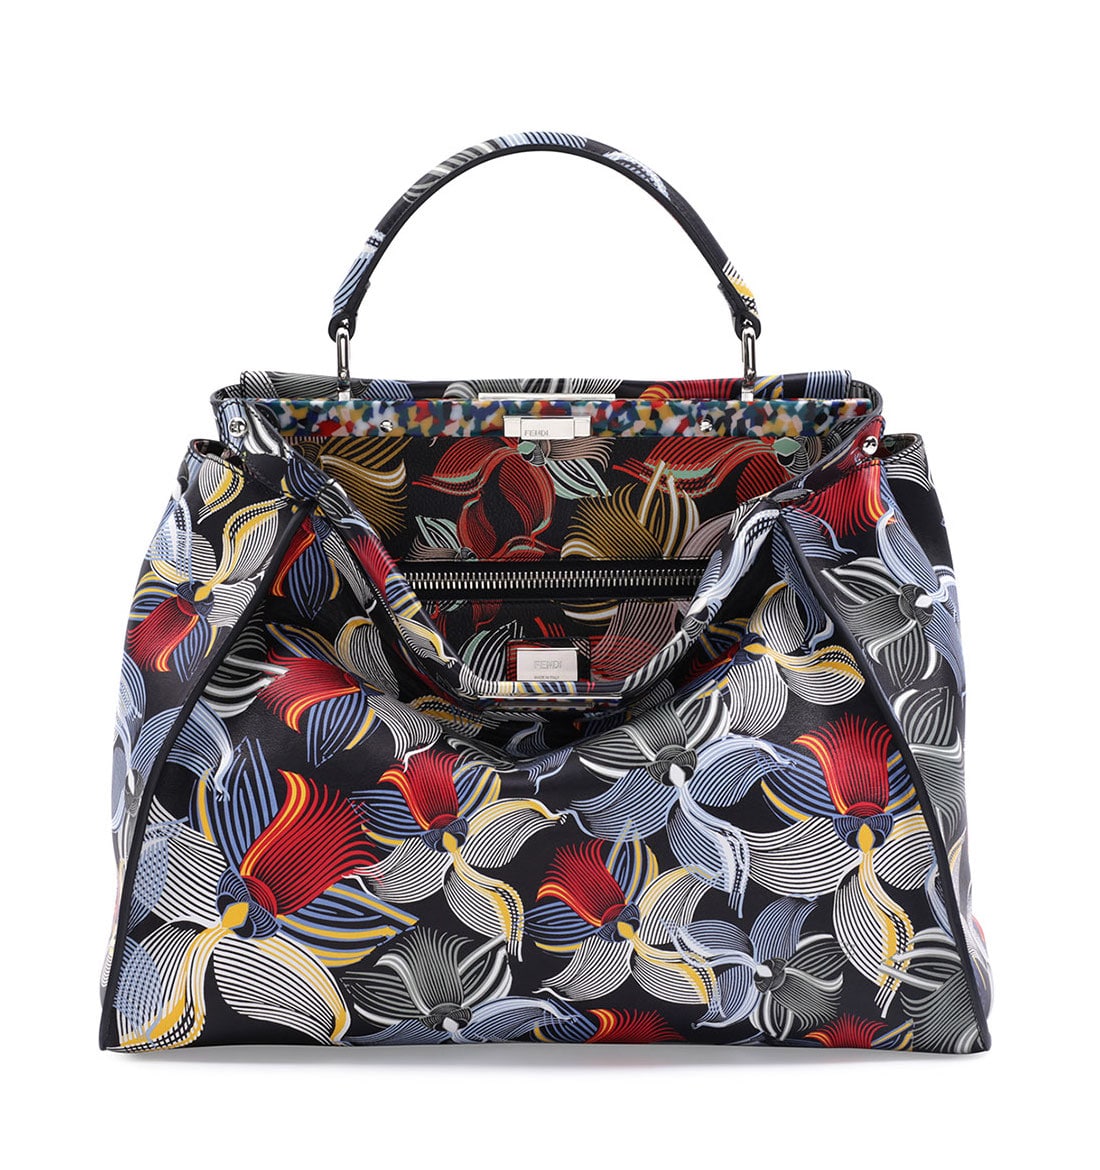 Fendi Spring/Summer 2015 Bag Collection featuring Micro Monster ...